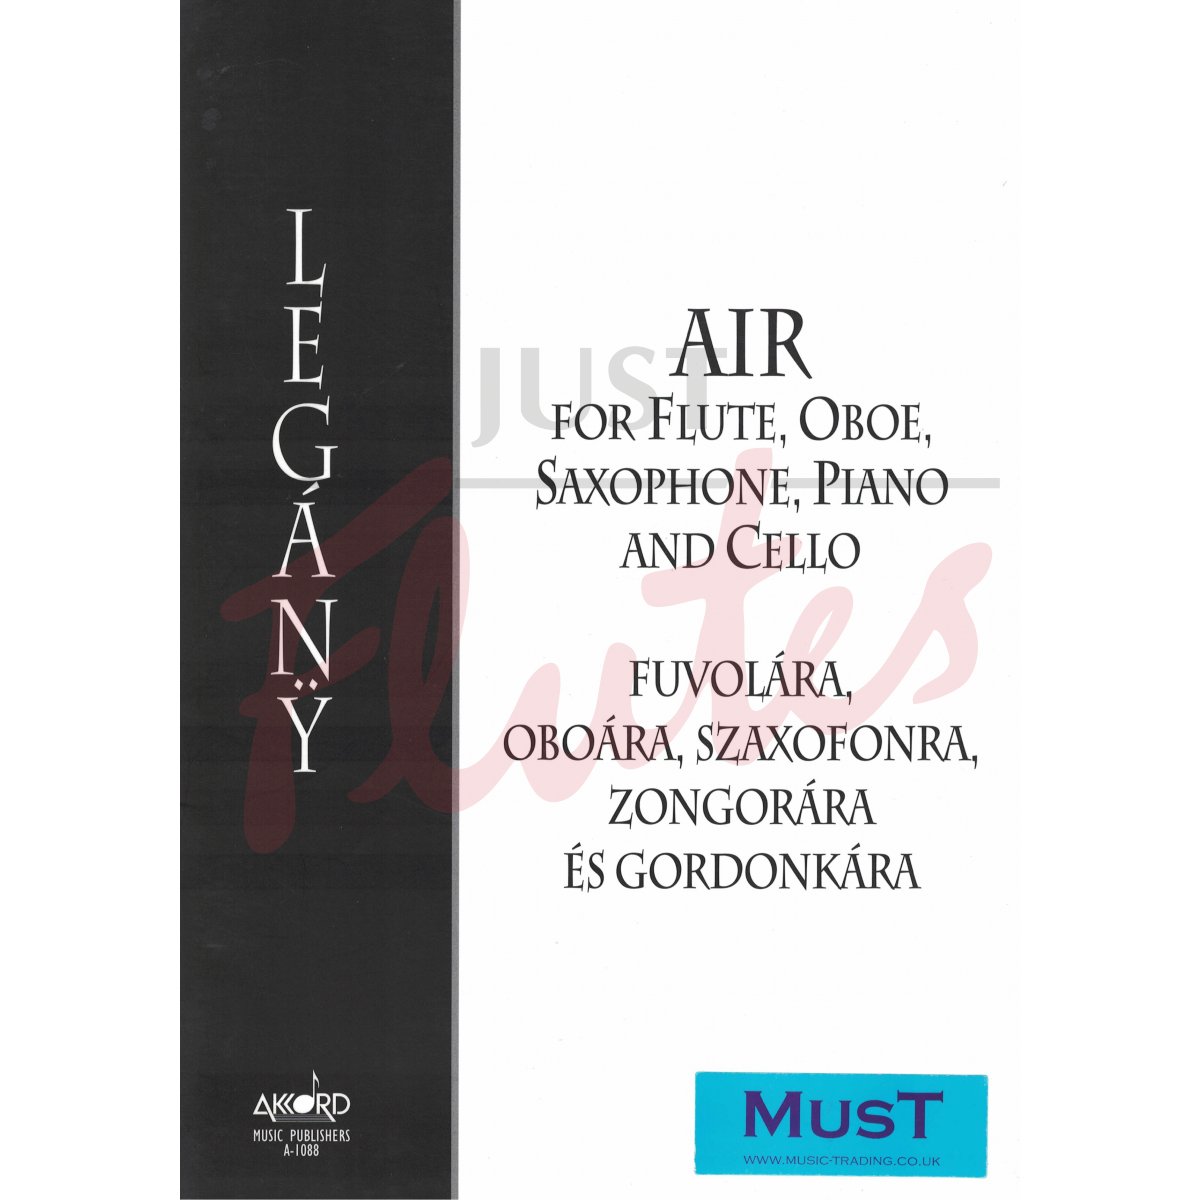 Air for Flute Oboe, Saxophone, Piano and Cello